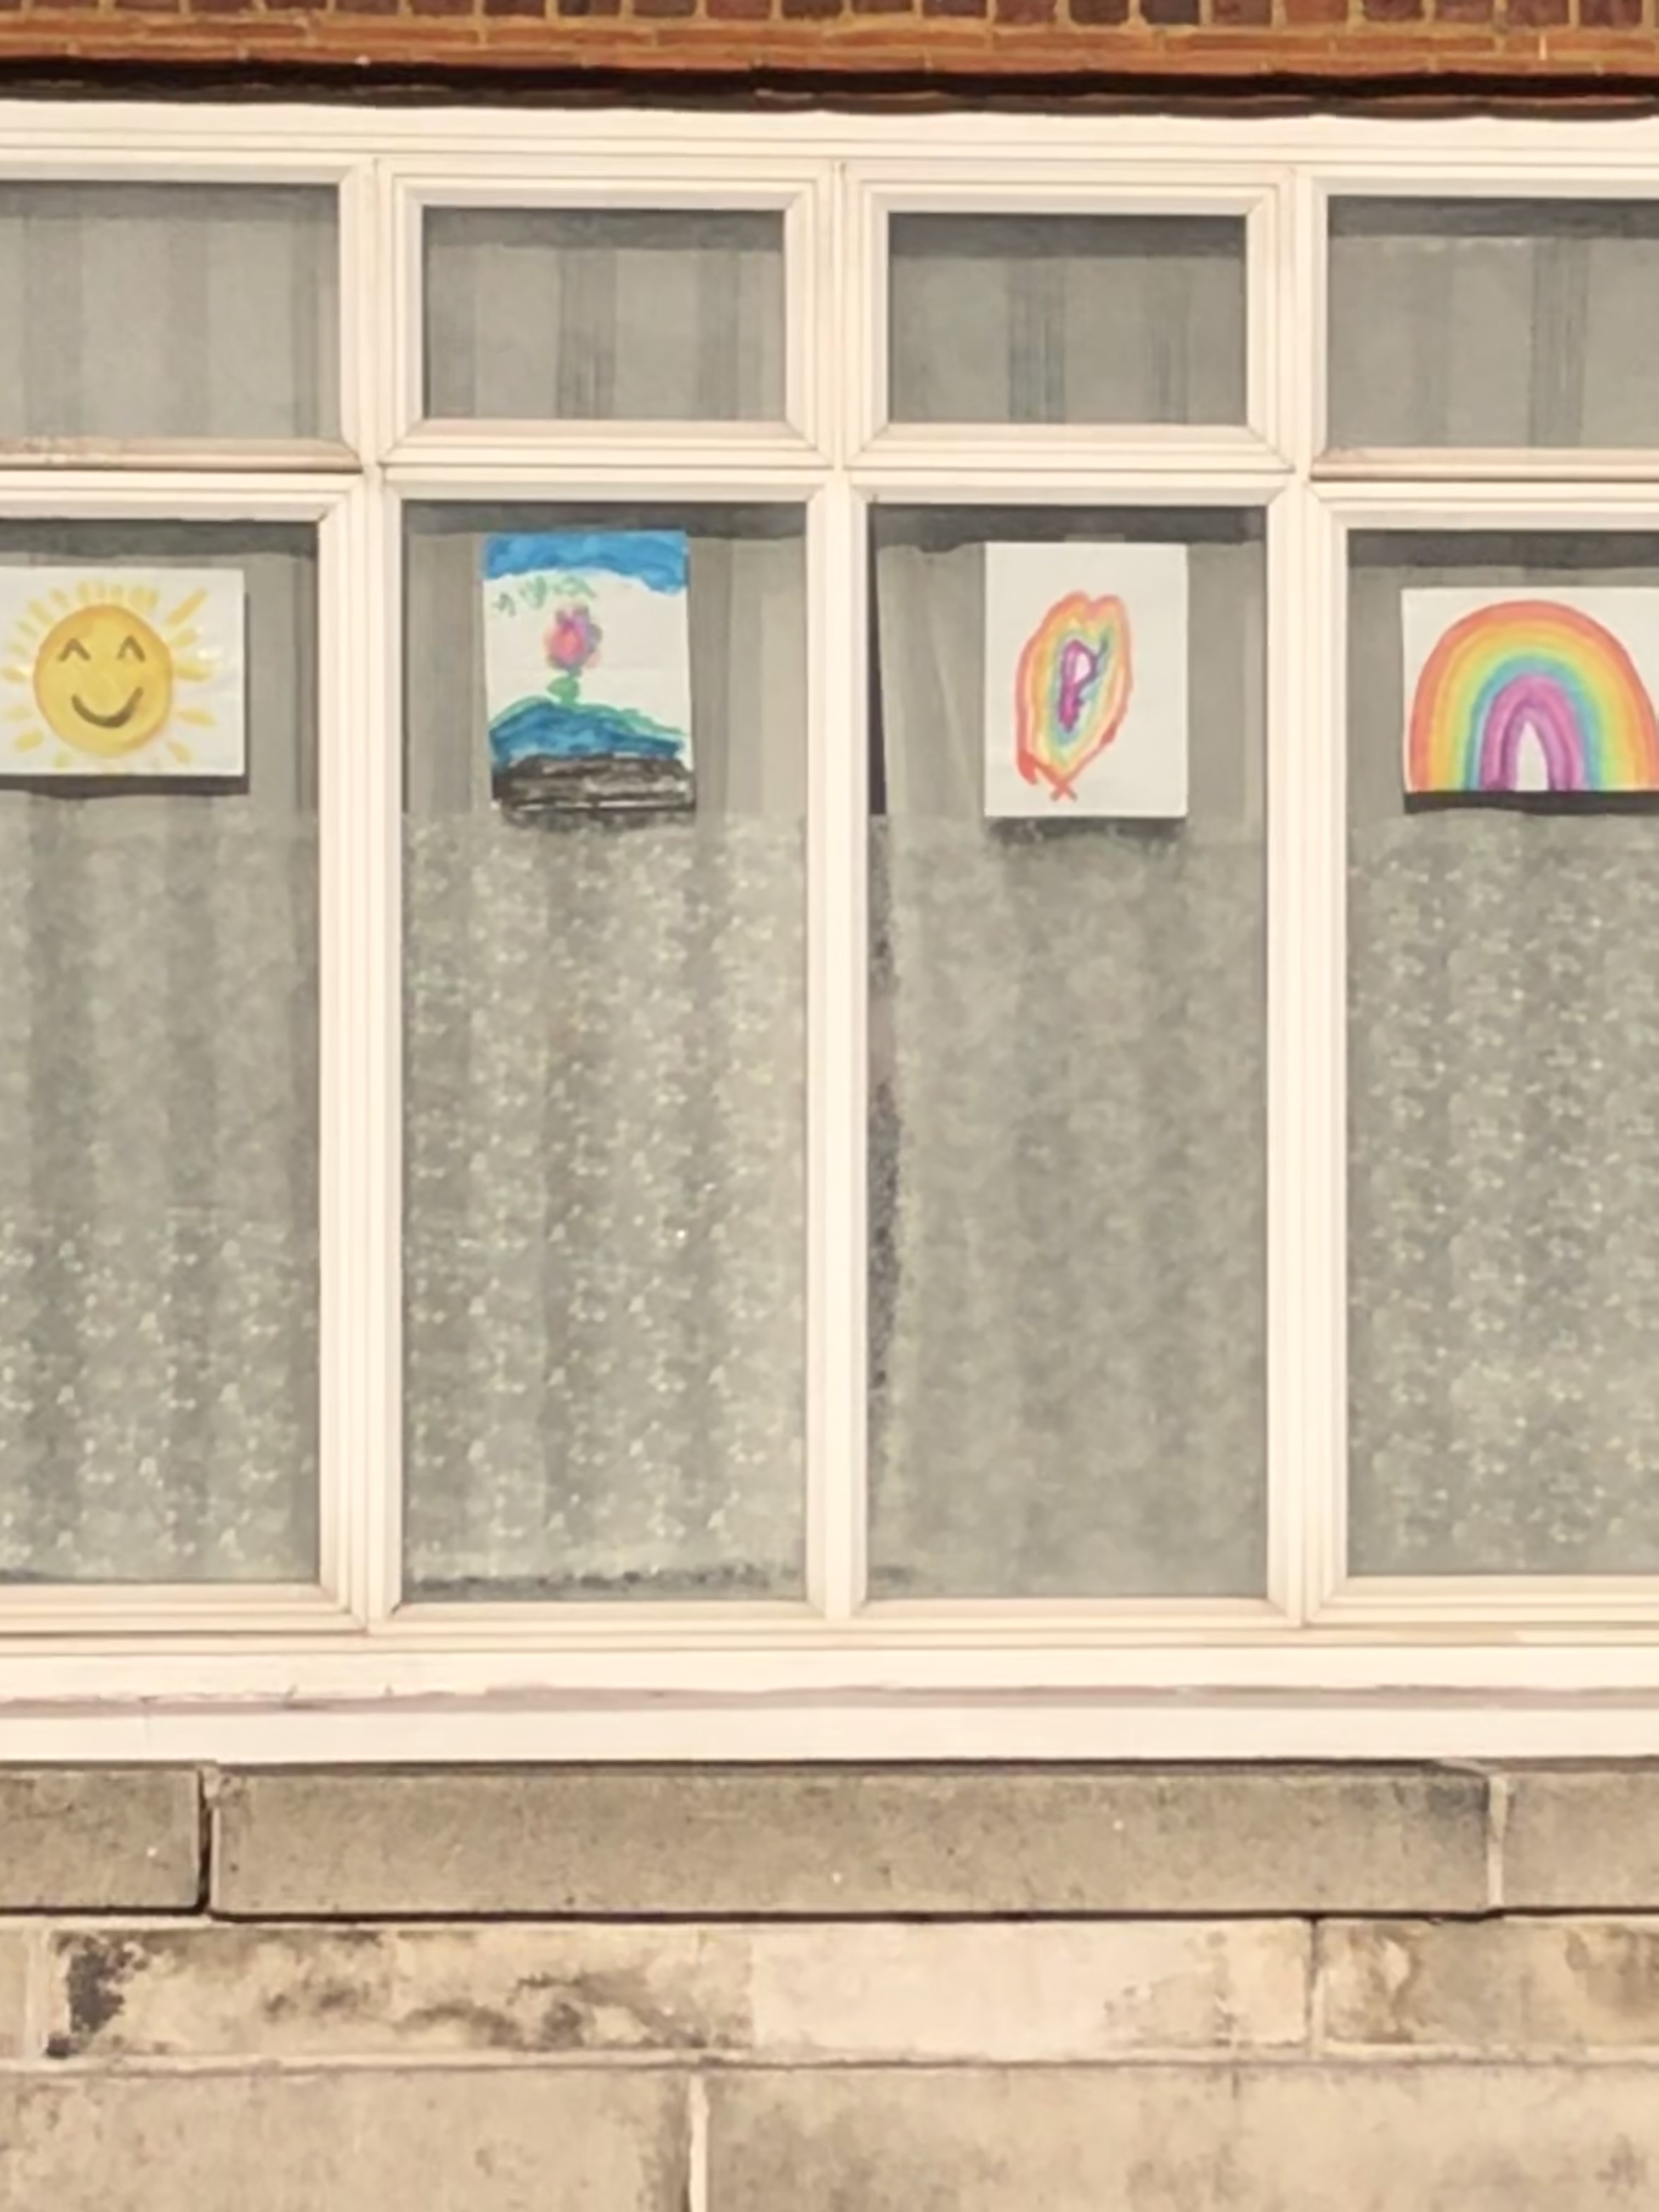 London Lockdown children occupying themselves  by drawing rainbows and displaying on their windows